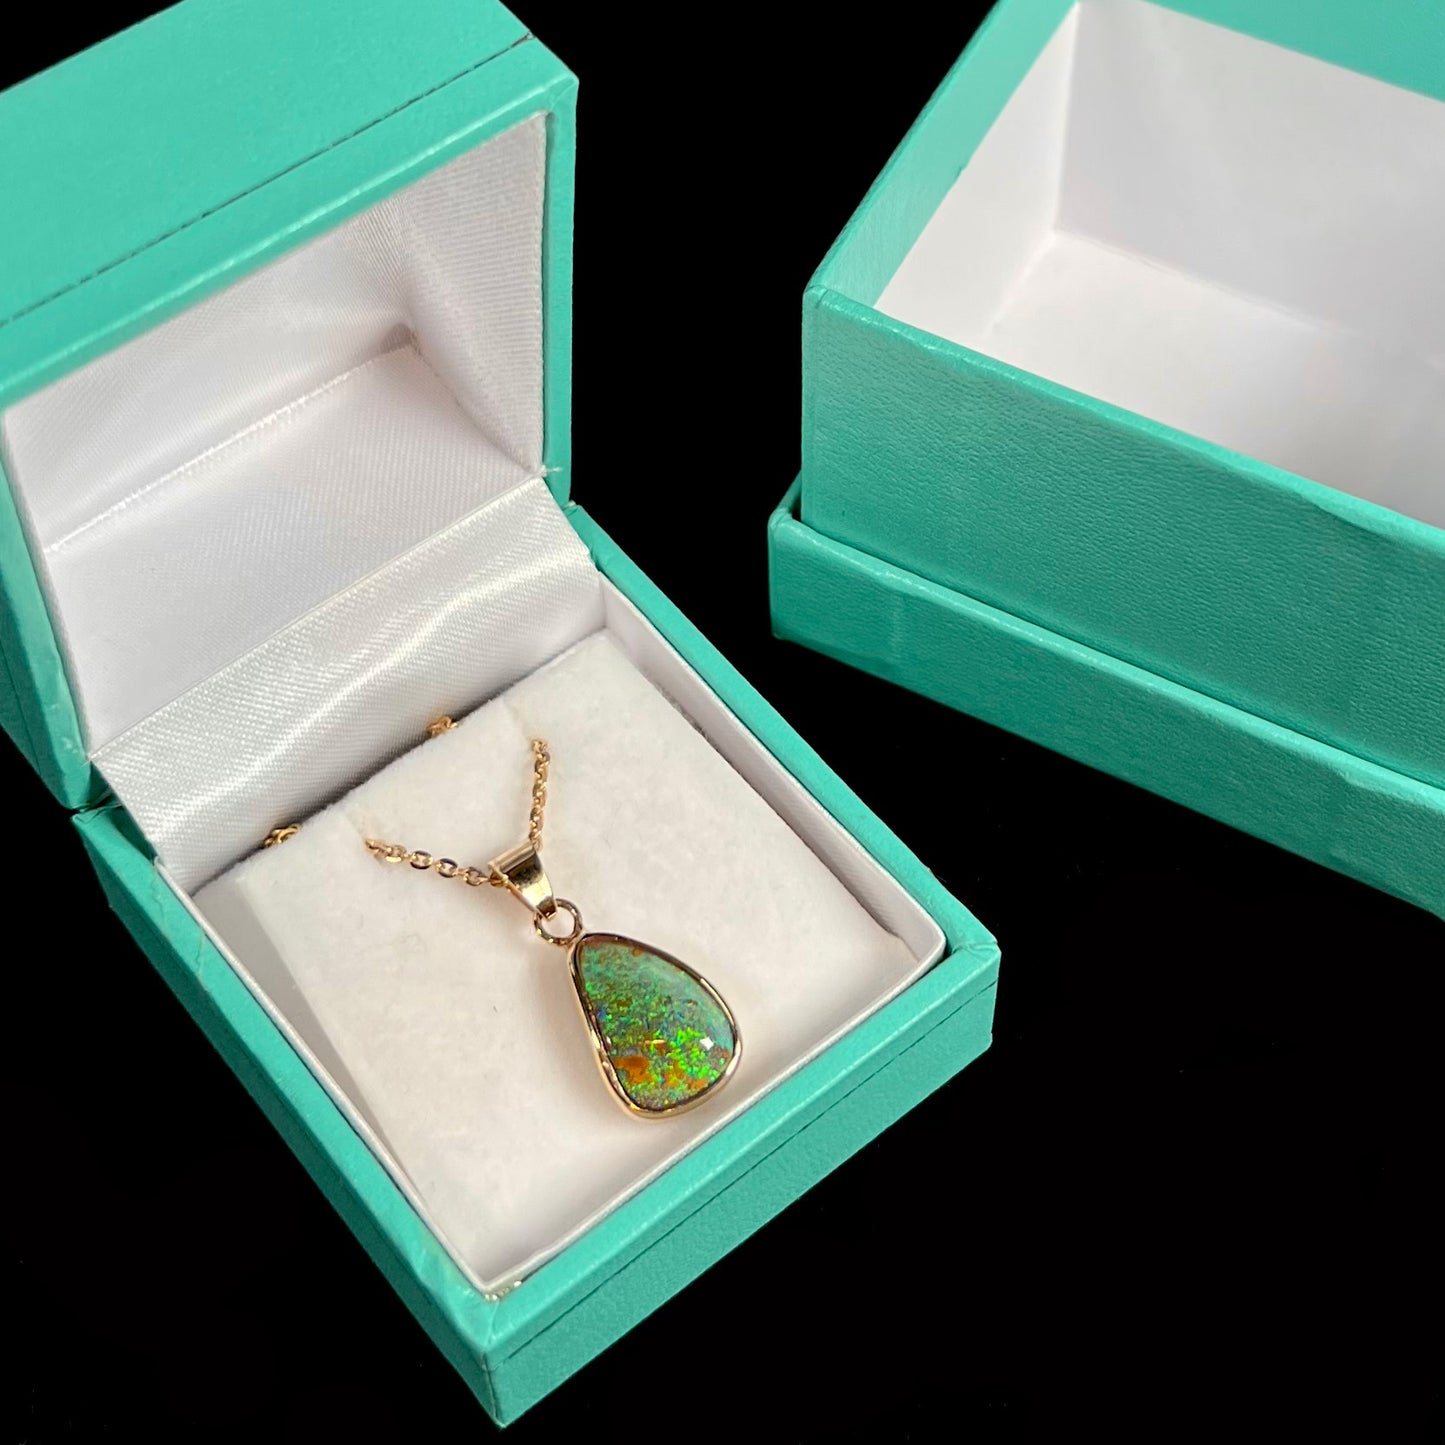 A ladies' natural boulder opal necklace set in 14k yellow gold.  The opal is bezel set and shows green and blue colors.